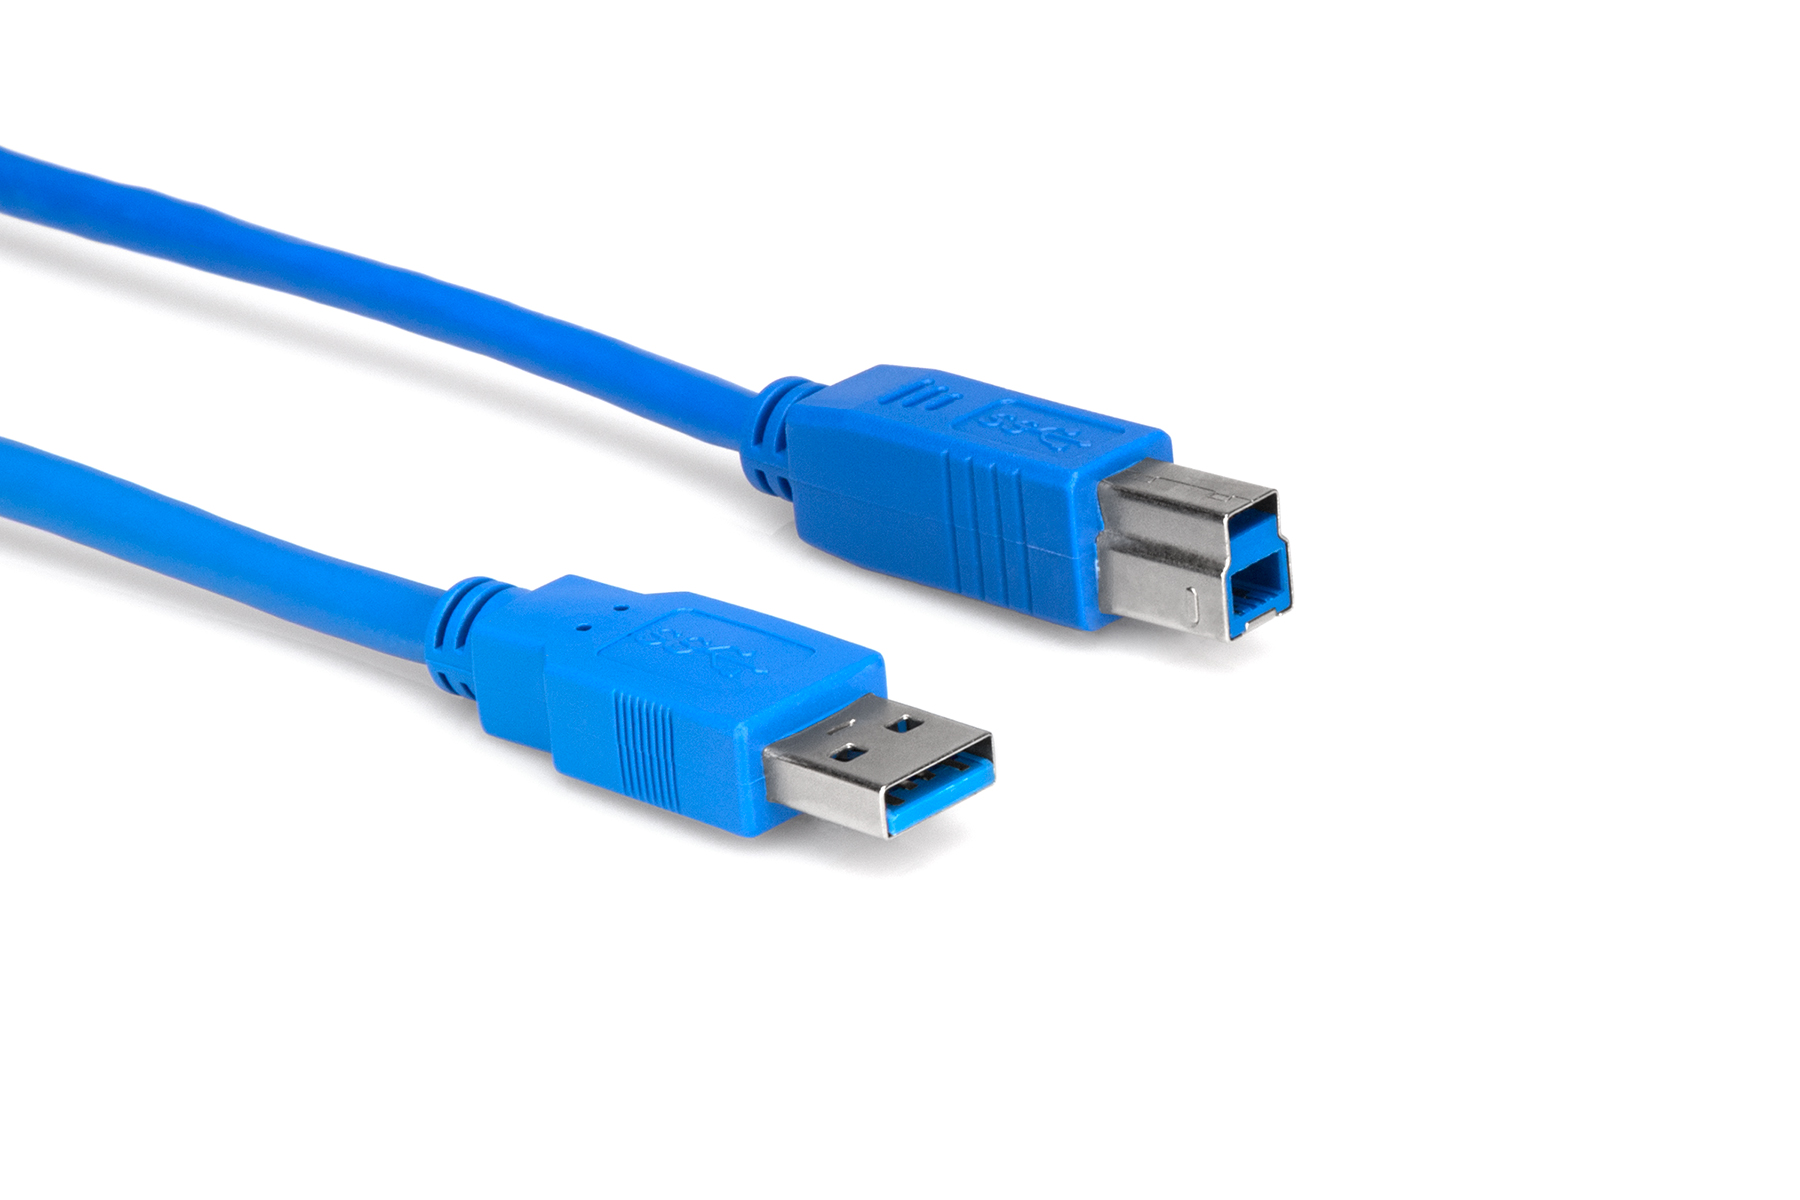 Hosa USB-C a USB-A 3.0 Cable de 1,82 mts SuperSpeed 3.0 5Gbps